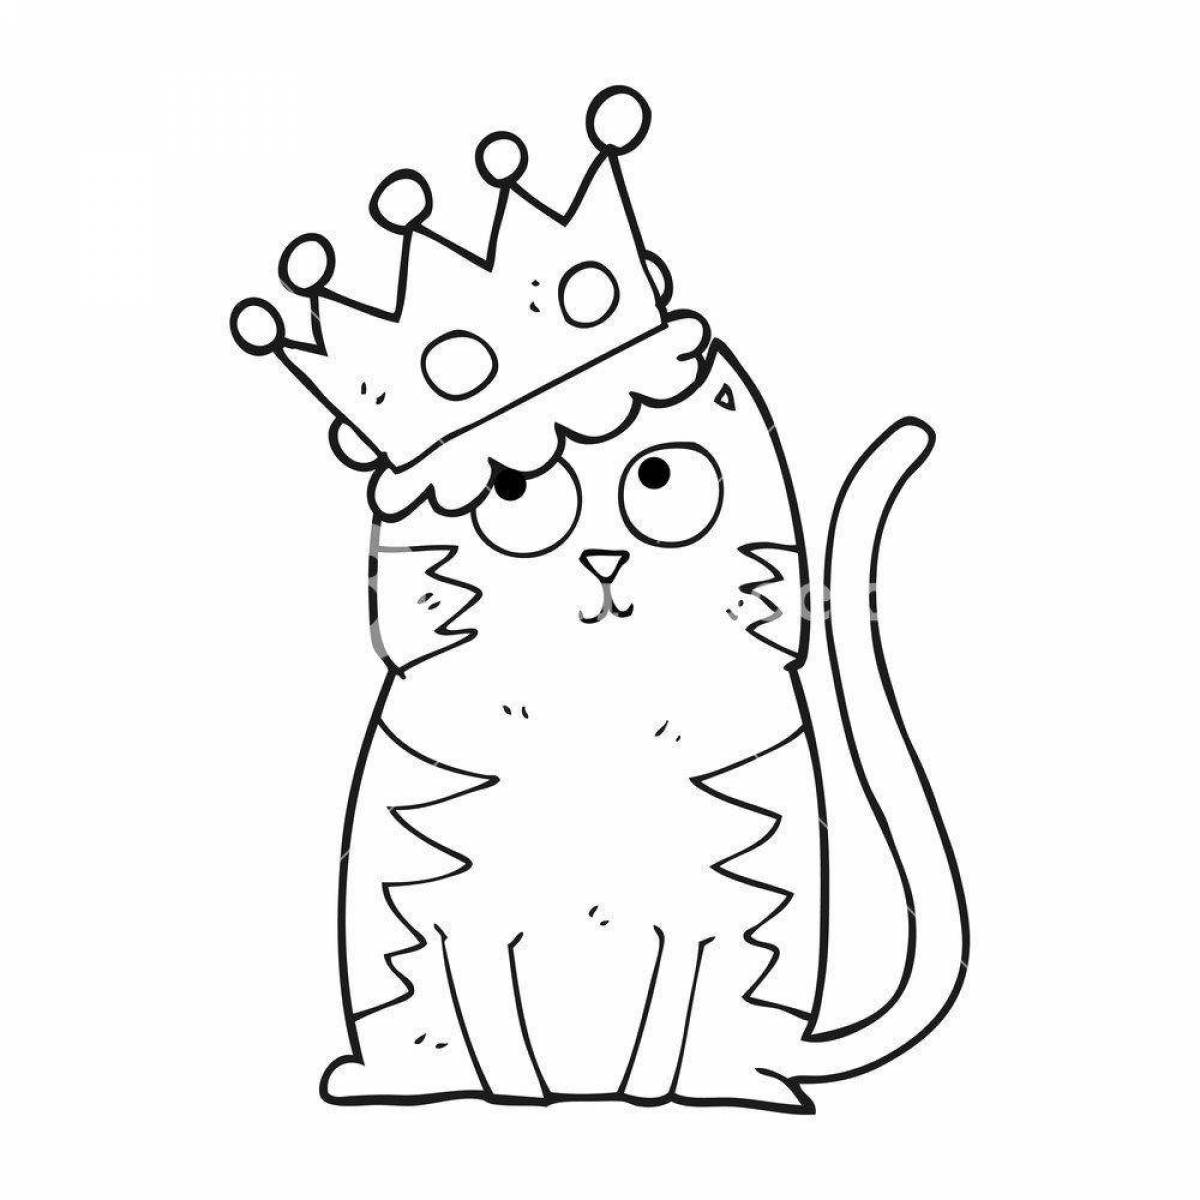 Colorful cat in a hat coloring book